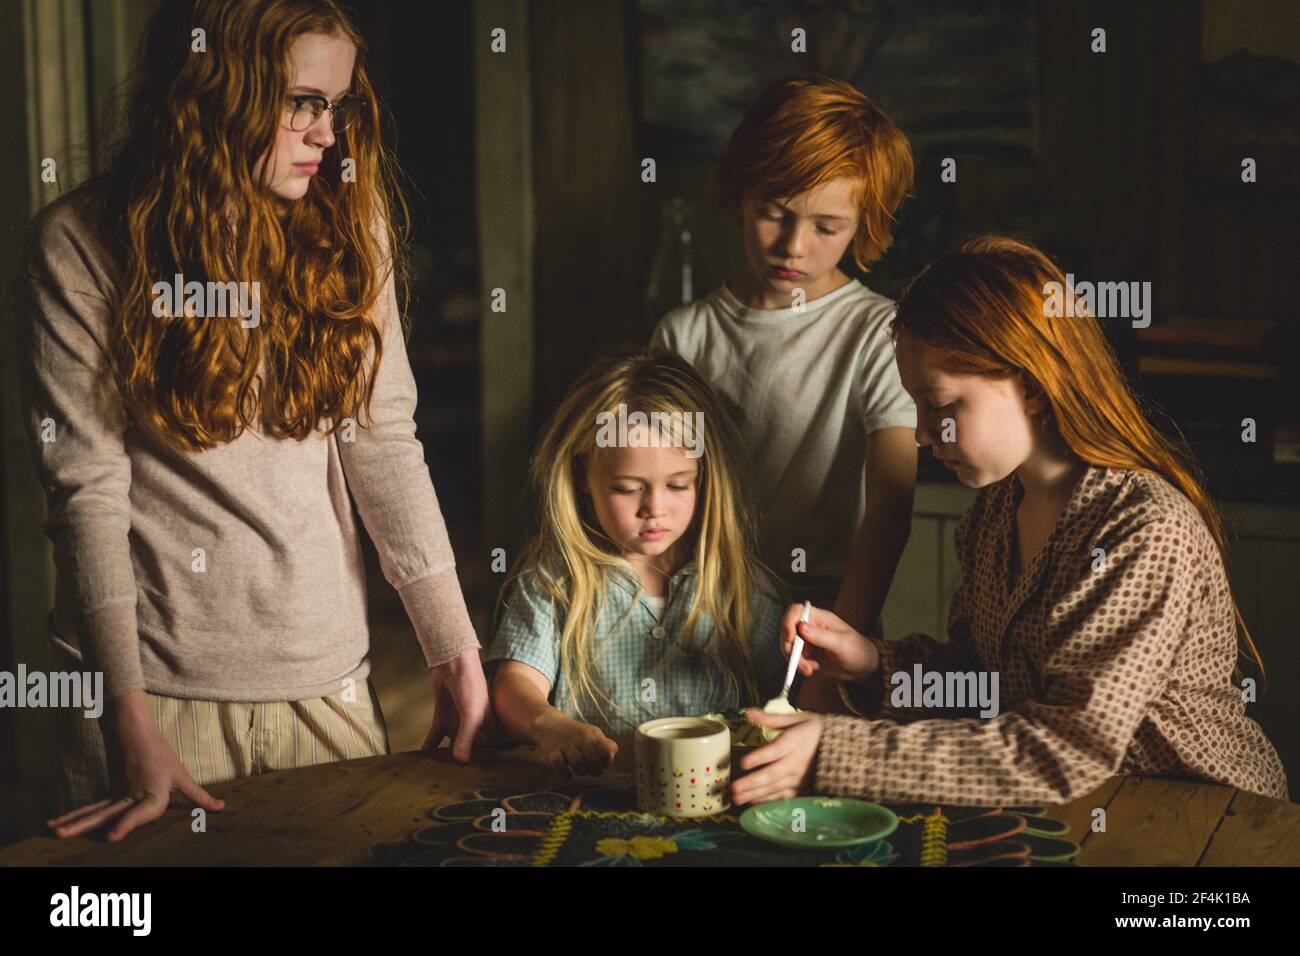 CHARLIE SHOTWELL, ELLA ANDERSON, SADIE SINK and EDEN GRACE REDFIELD in THE GLASS CASTLE (2017), directed by DESTIN DANIEL CRETTON. Copyright: Editorial use only. No merchandising or book covers. This is a publicly distributed handout. Access rights only, no license of copyright provided. Only to be reproduced in conjunction with promotion of this film. Credit: LIONSGATE / GILES NETTER, JAKE / Album Stock Photo